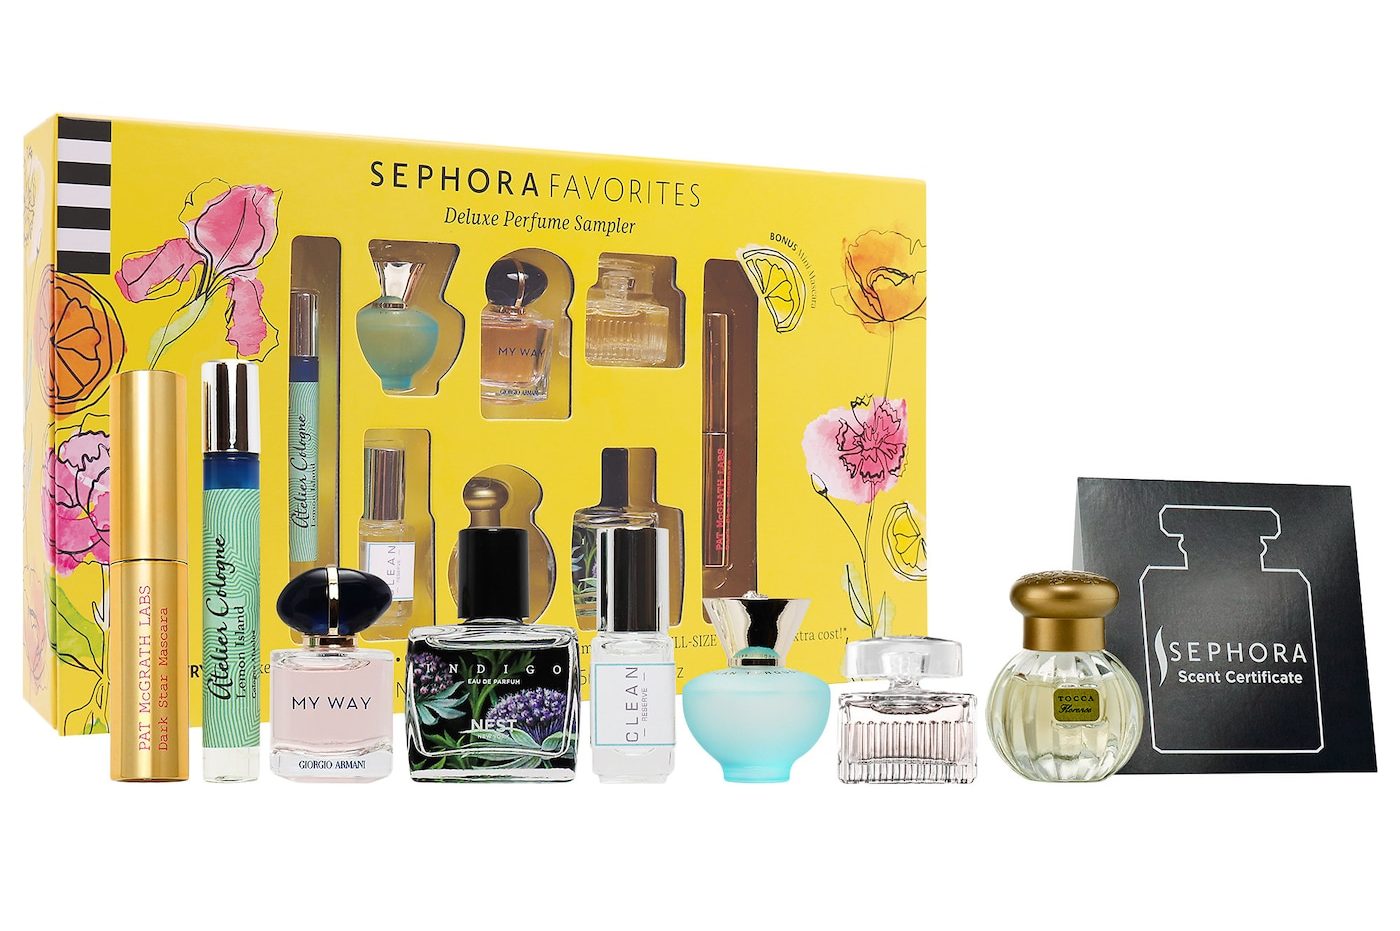 New Sephora Favorites Fragrance Sets – Available Now + Full Spoilers | MSA